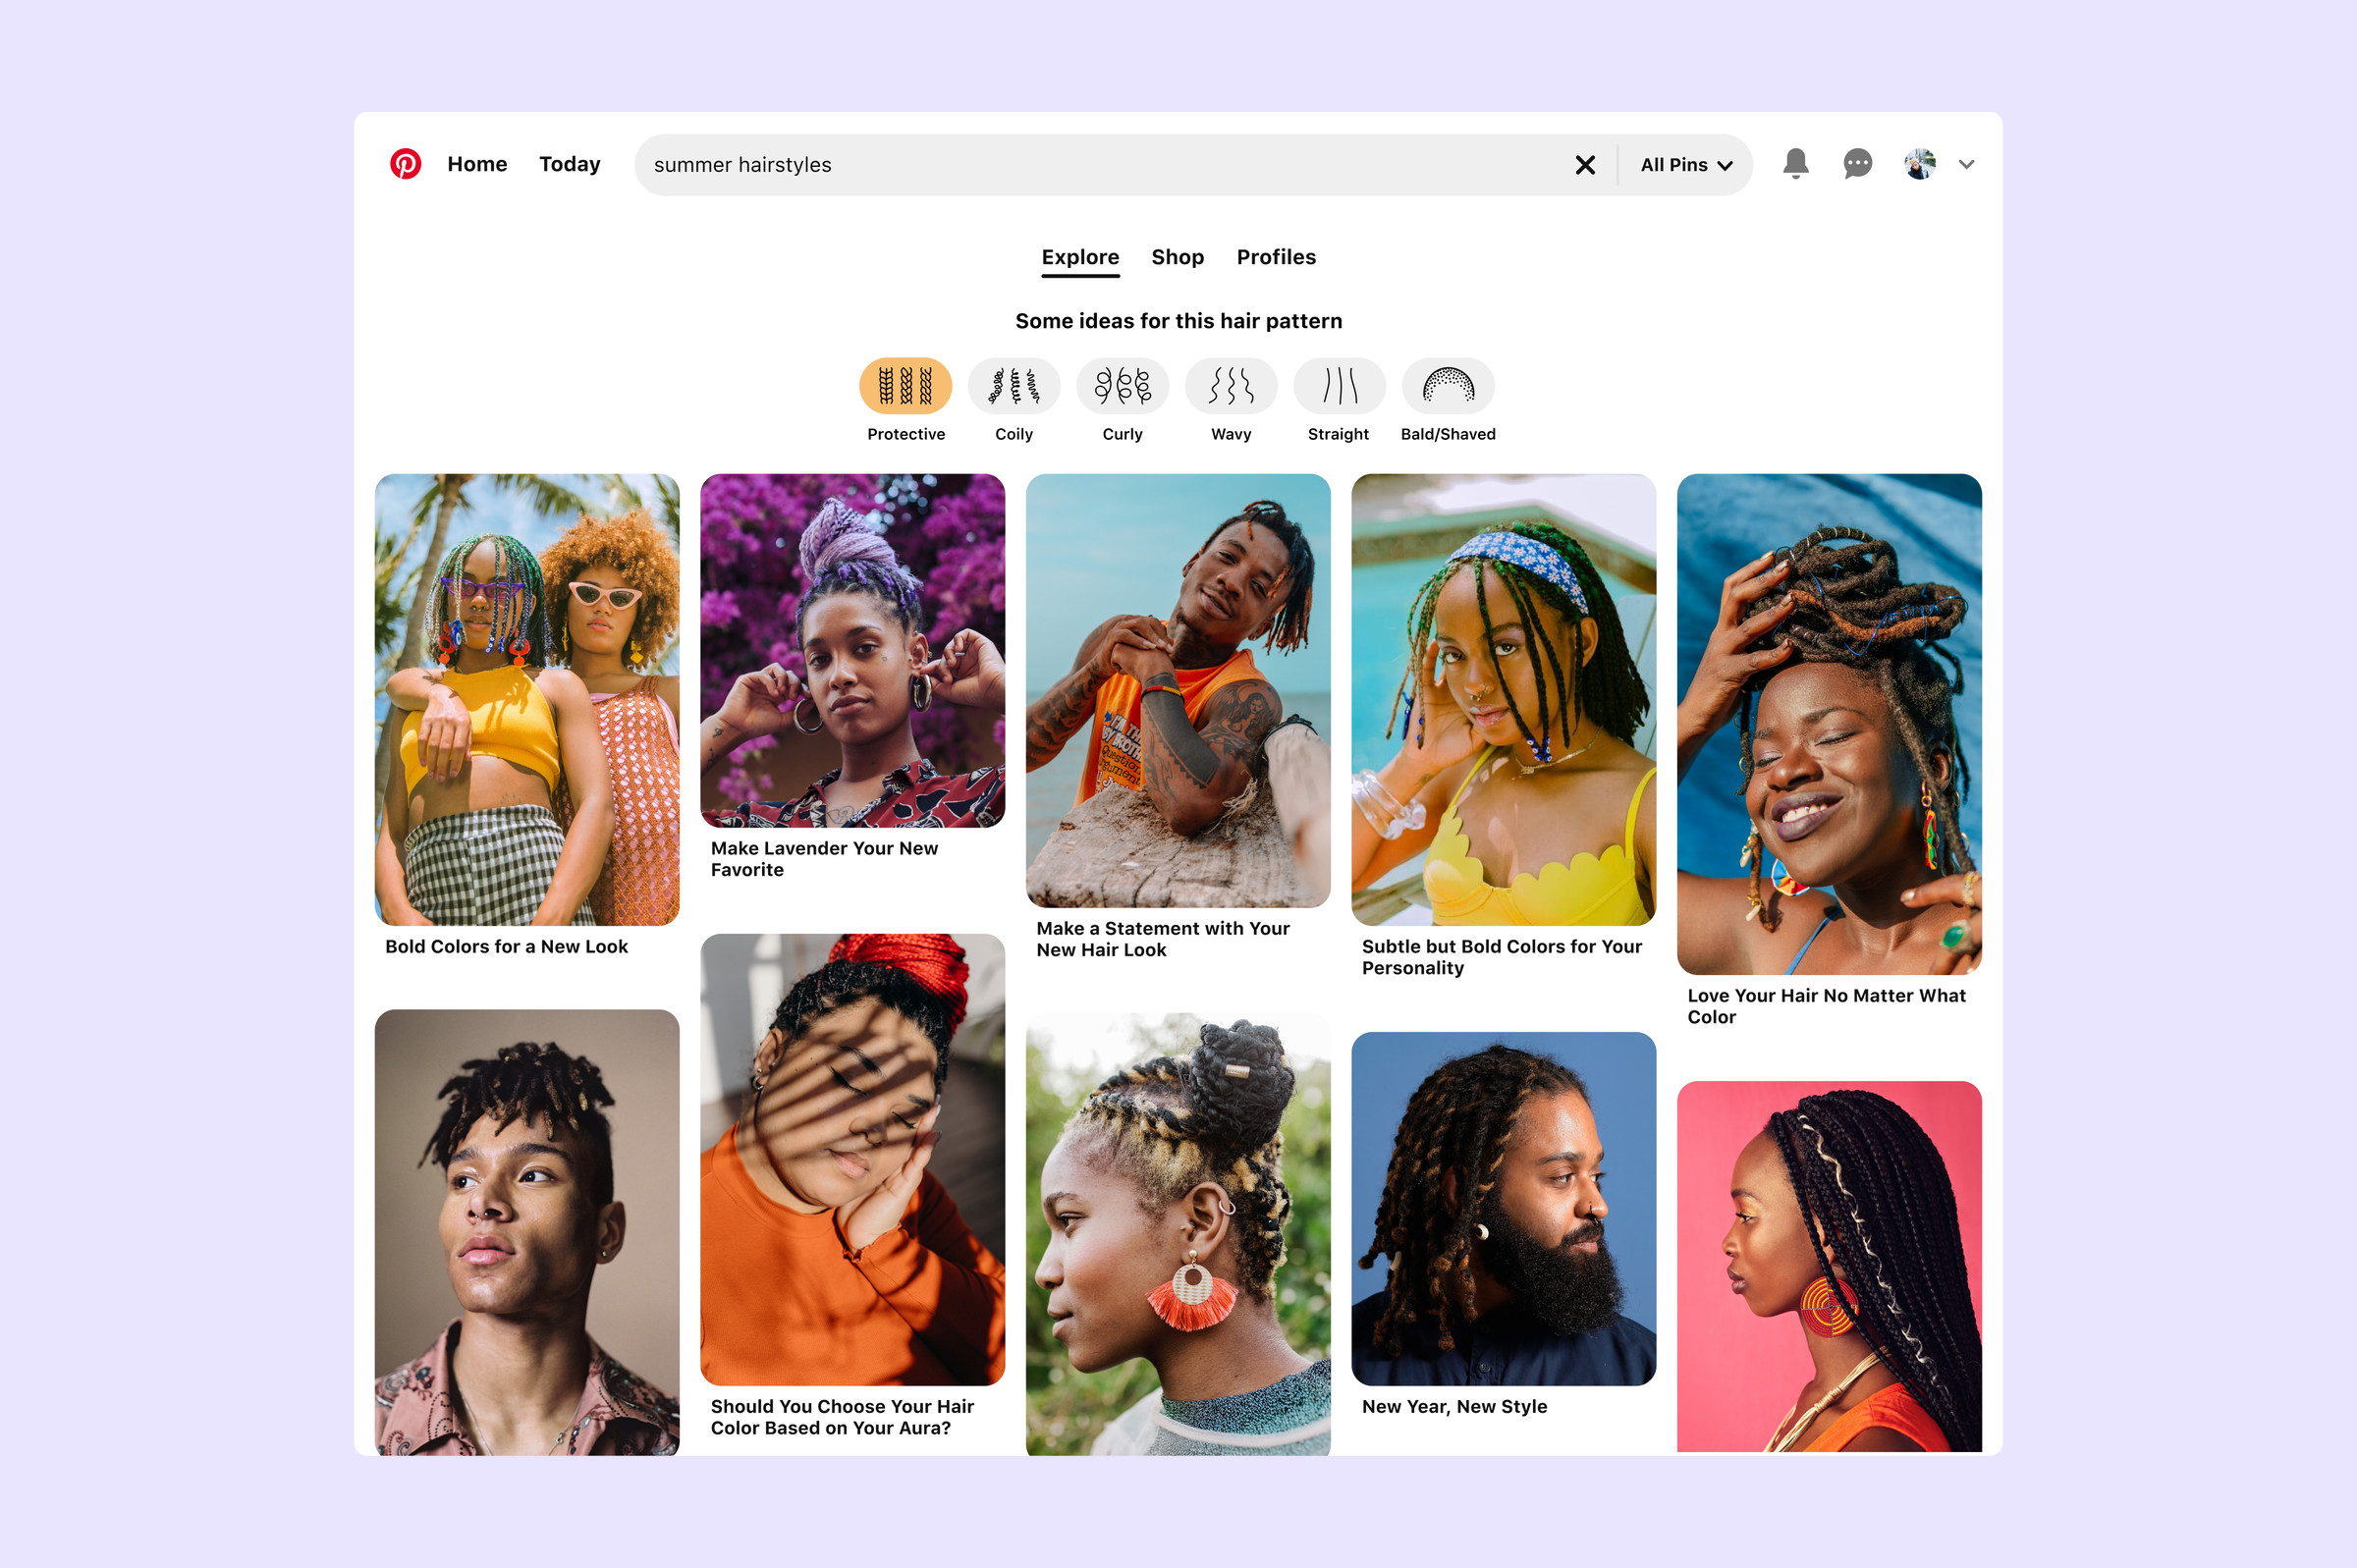 Screenshot of a Pinterest search for “summer hairstyles” showing filter options for protective, coily, curly, wavy, straight, and shave/ bald. Protective is selected, showing various pins of people with braids and twists.